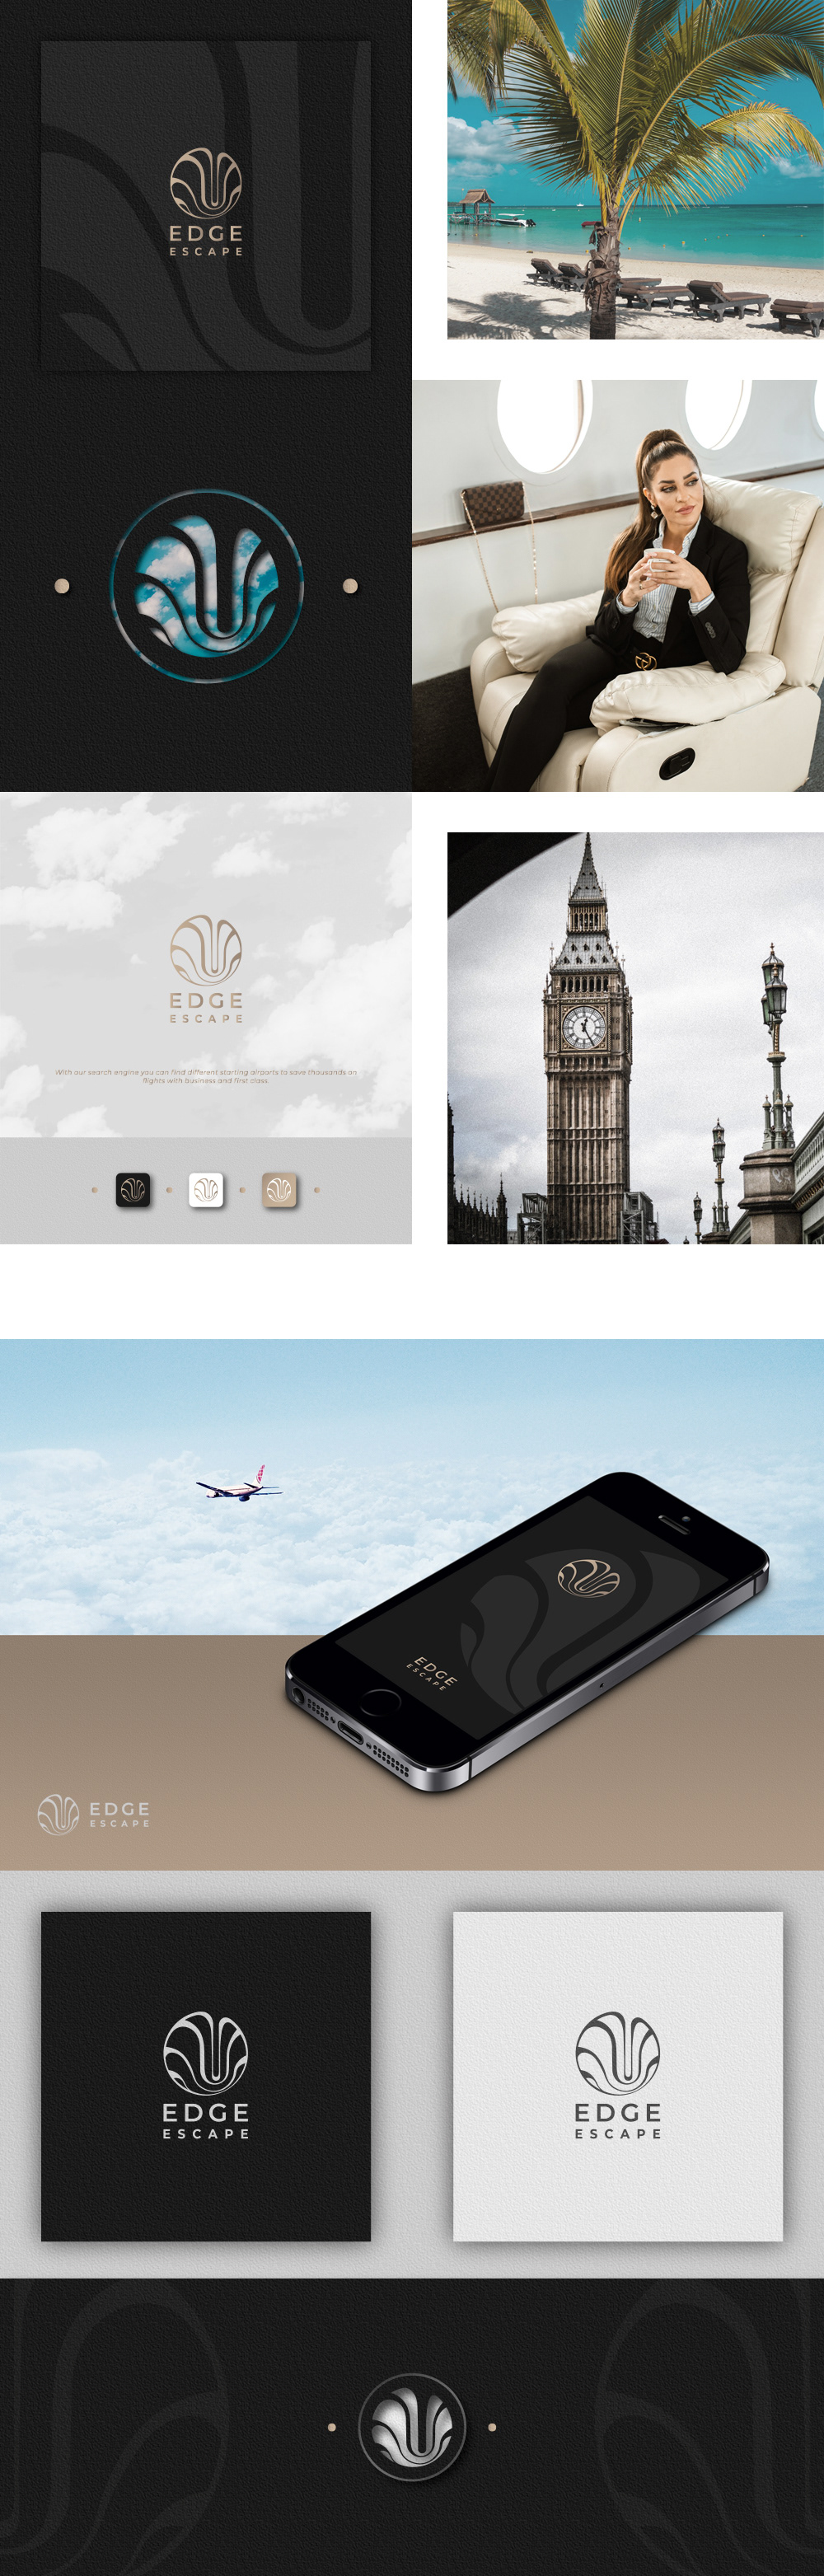 elegant gold Logo Design luxurious organic search engine for flights sophisticated Travel & Hotel